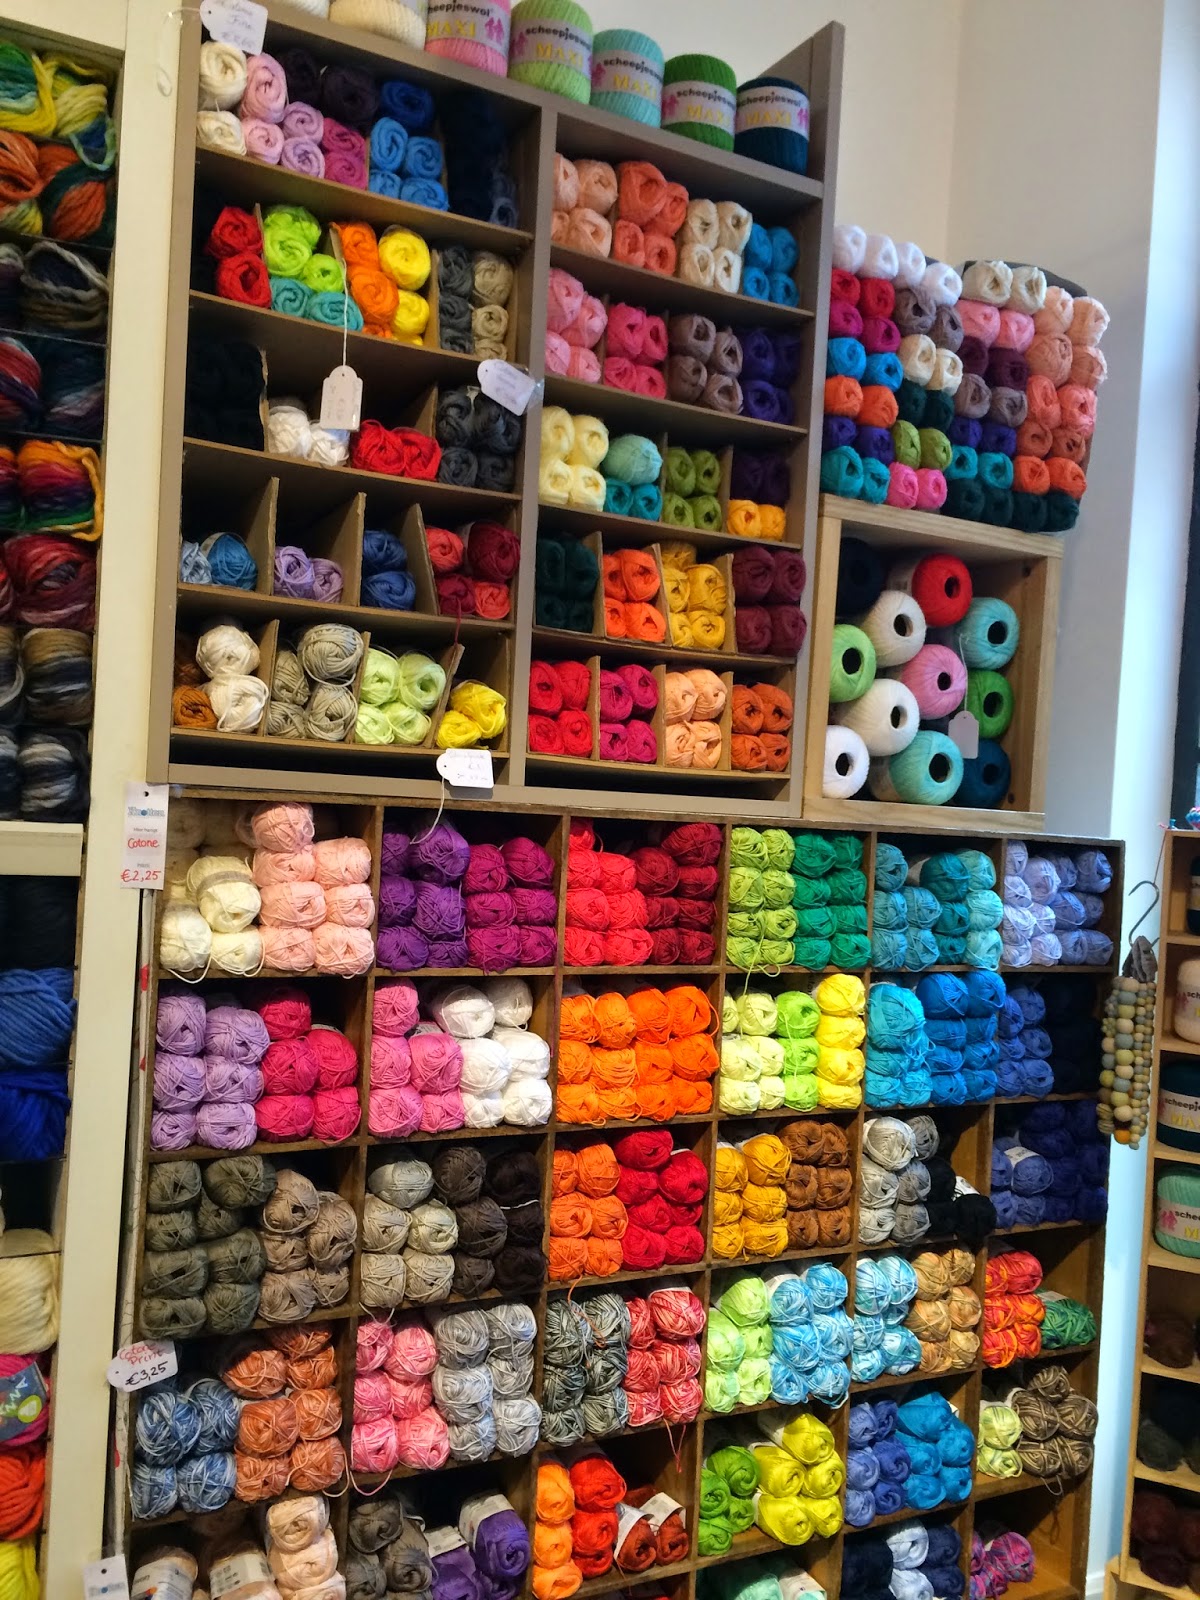 Confessions of an Oxfordshire stitcher: Knotten the Delft yarn shop